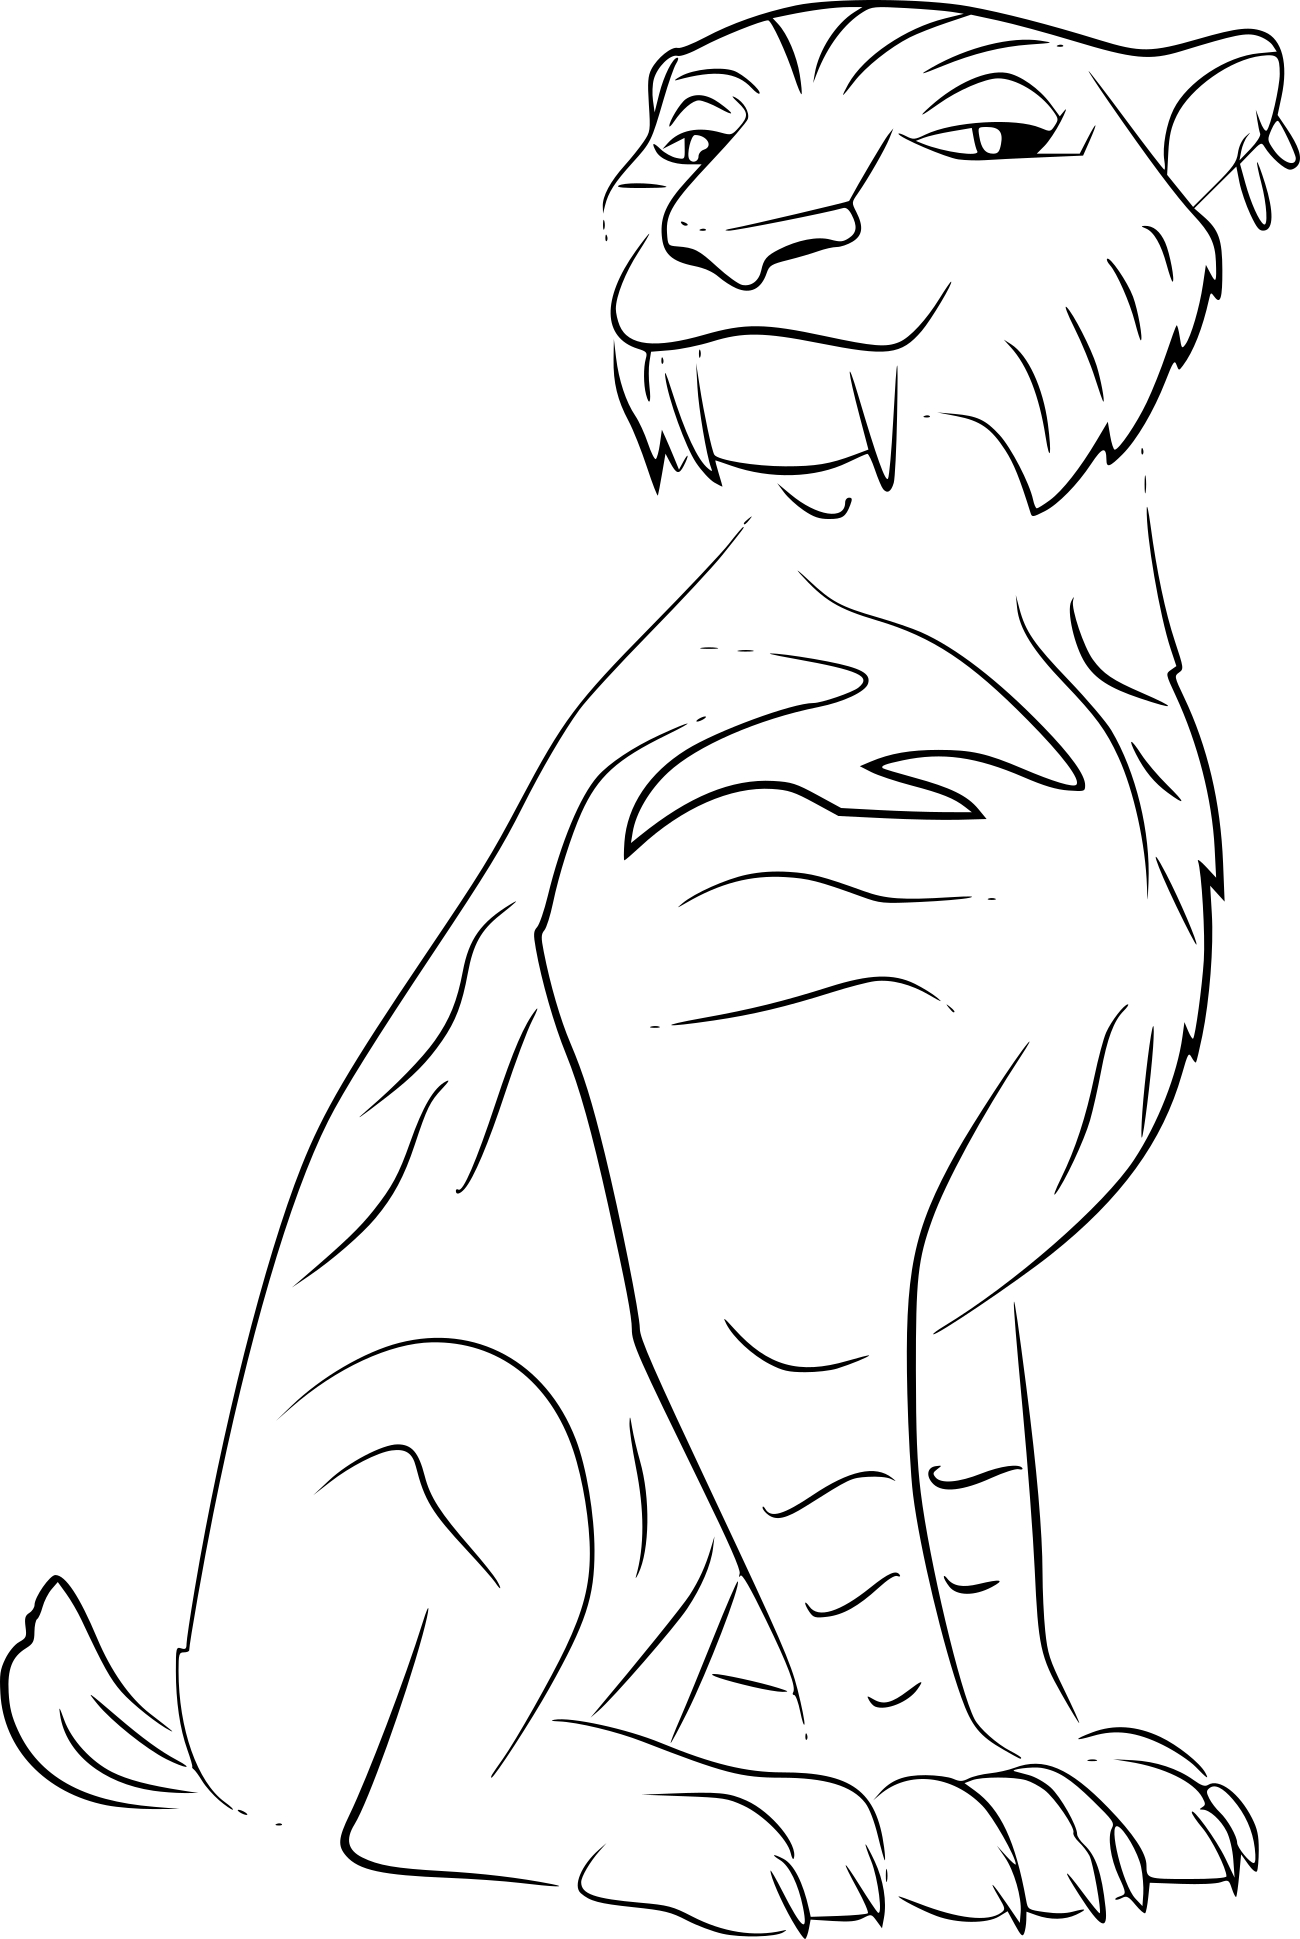 Shira Ice Age coloring page